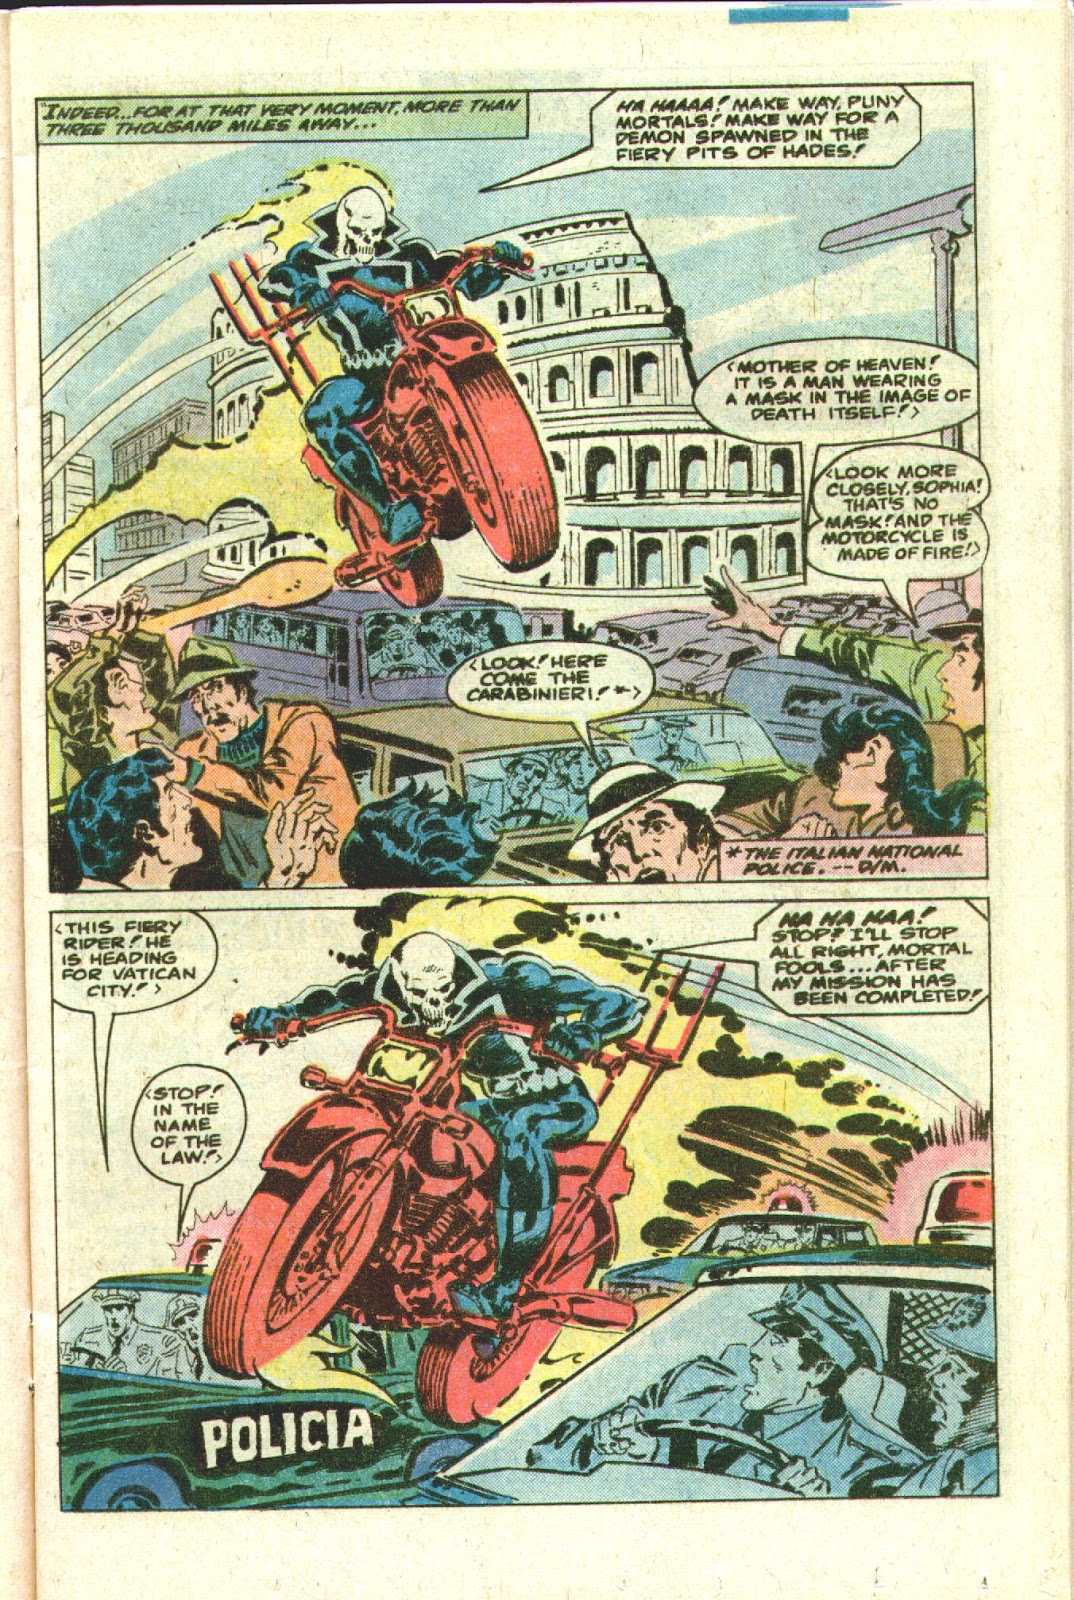 What If? (1977) issue 28 - Daredevil became an agent of SHIELD - Page 11